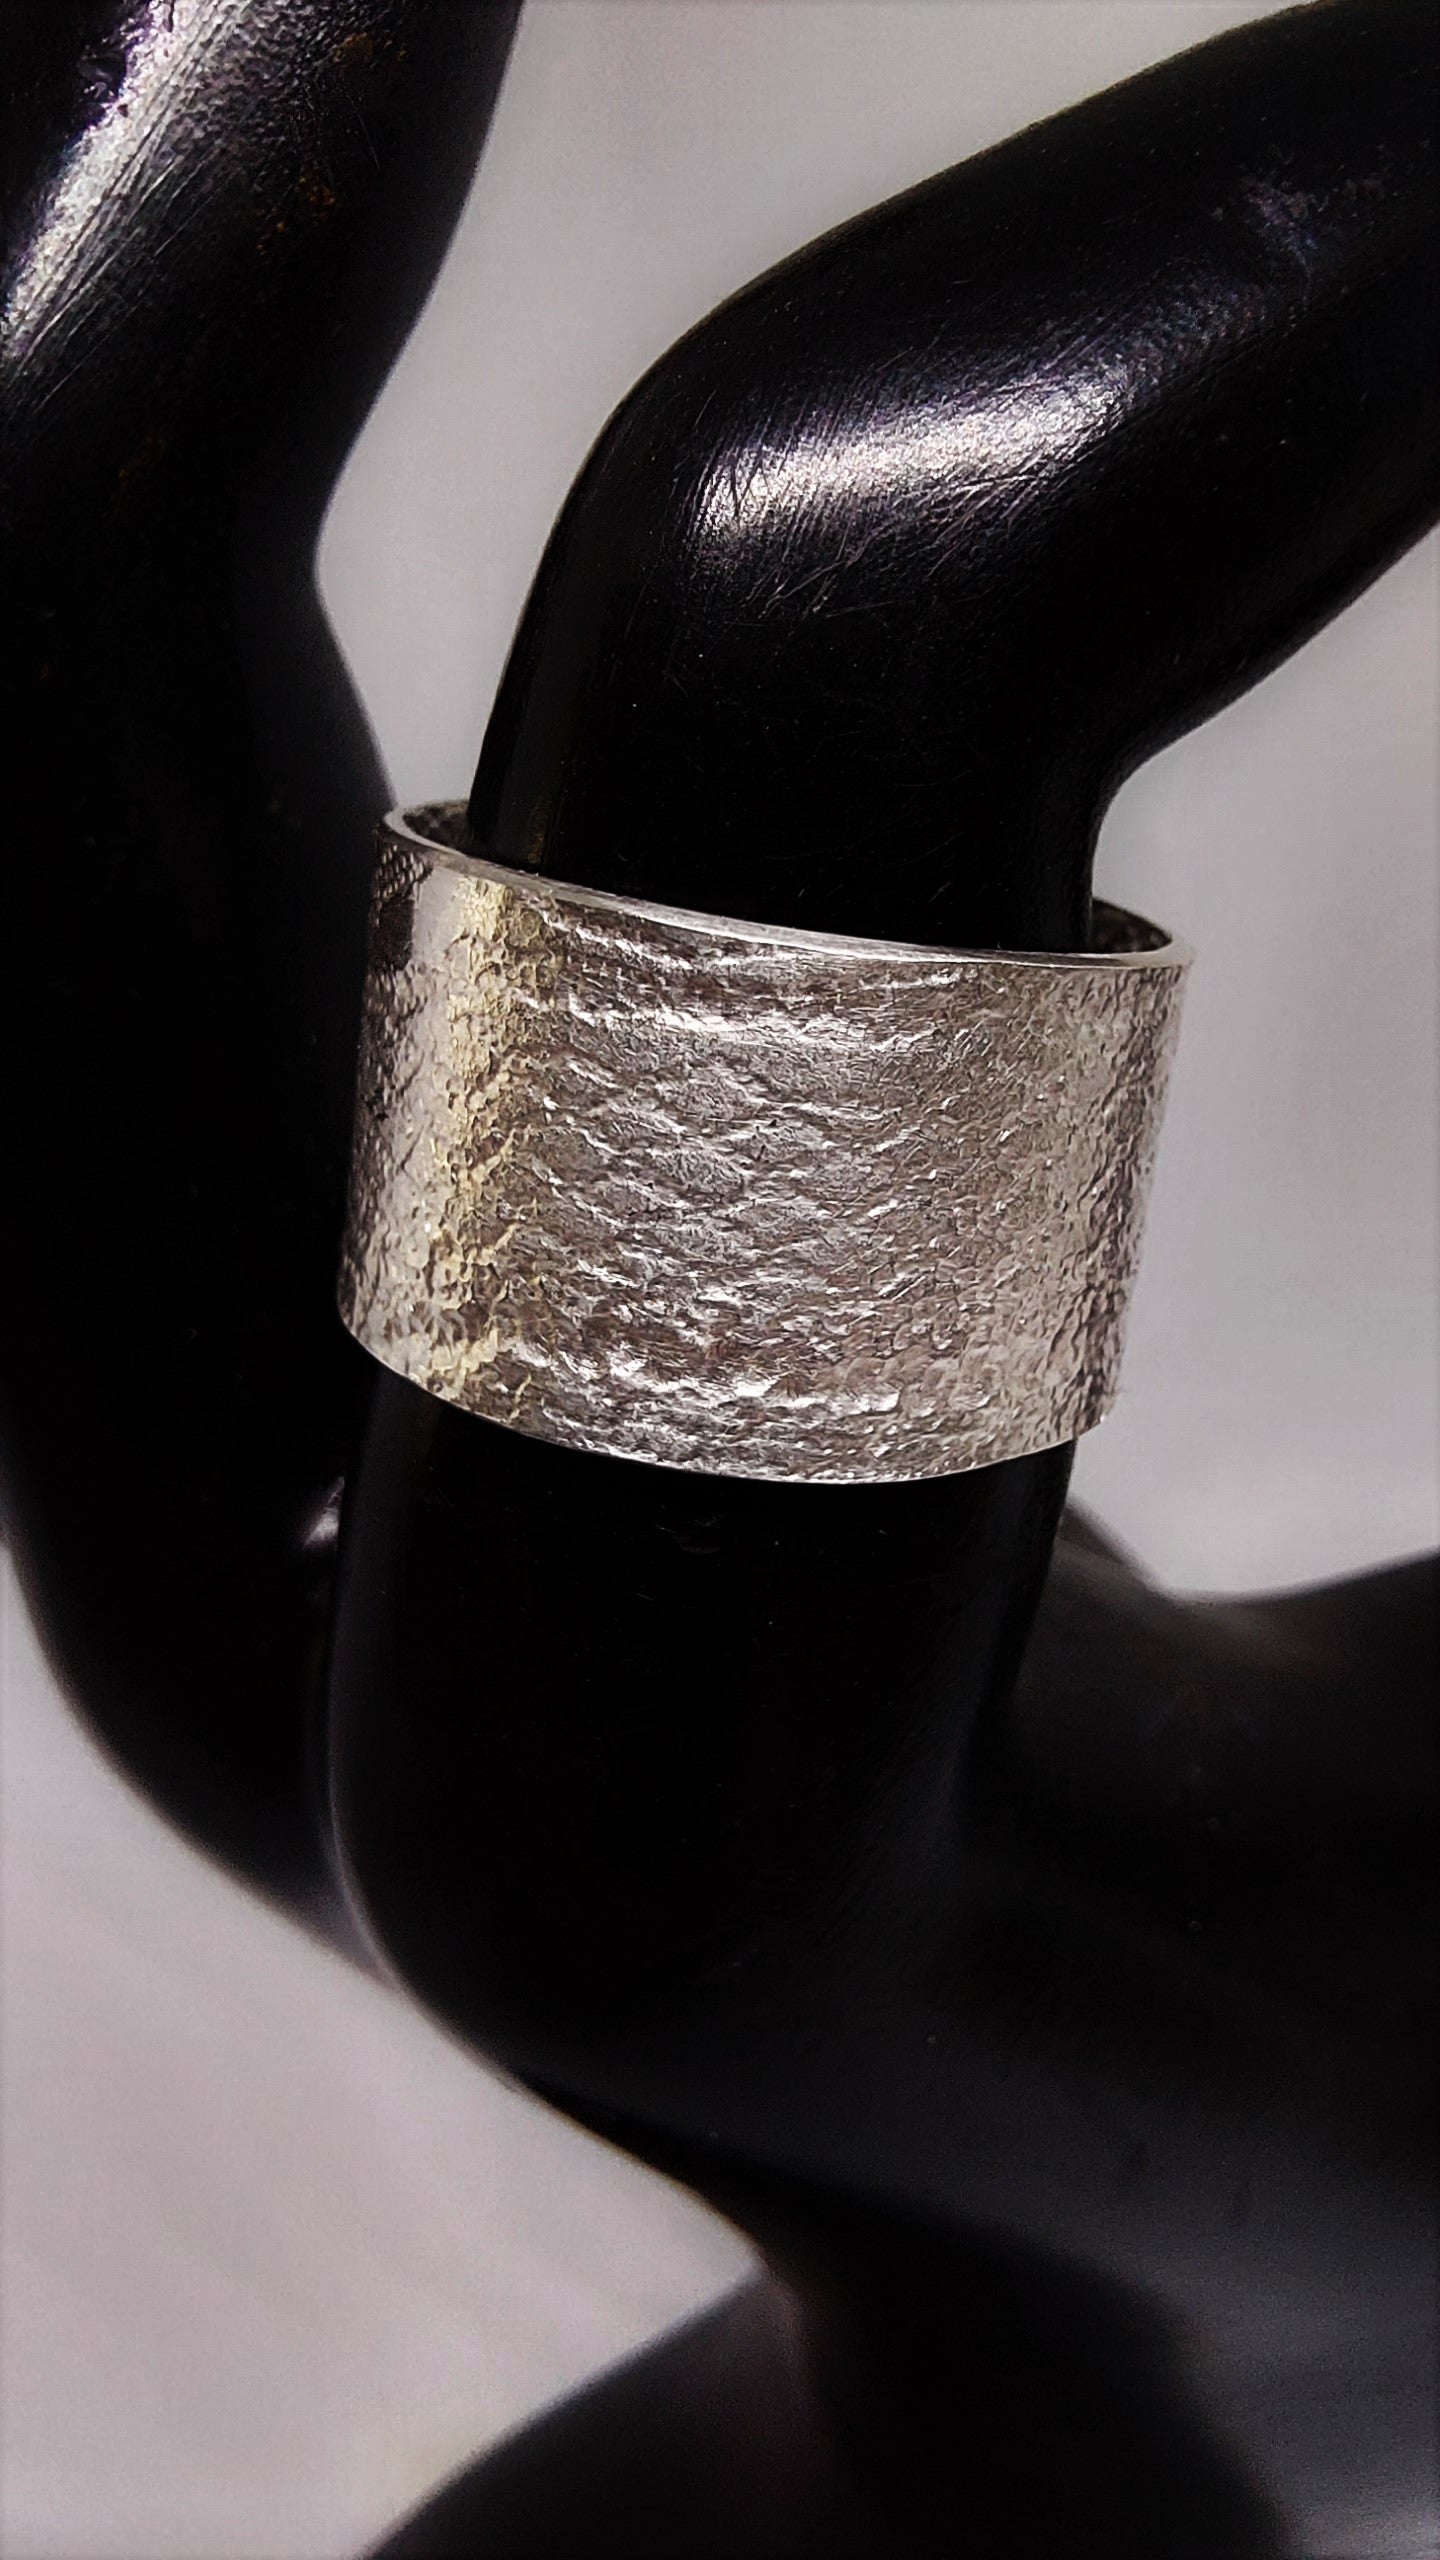 Textured Sterling Silver Band